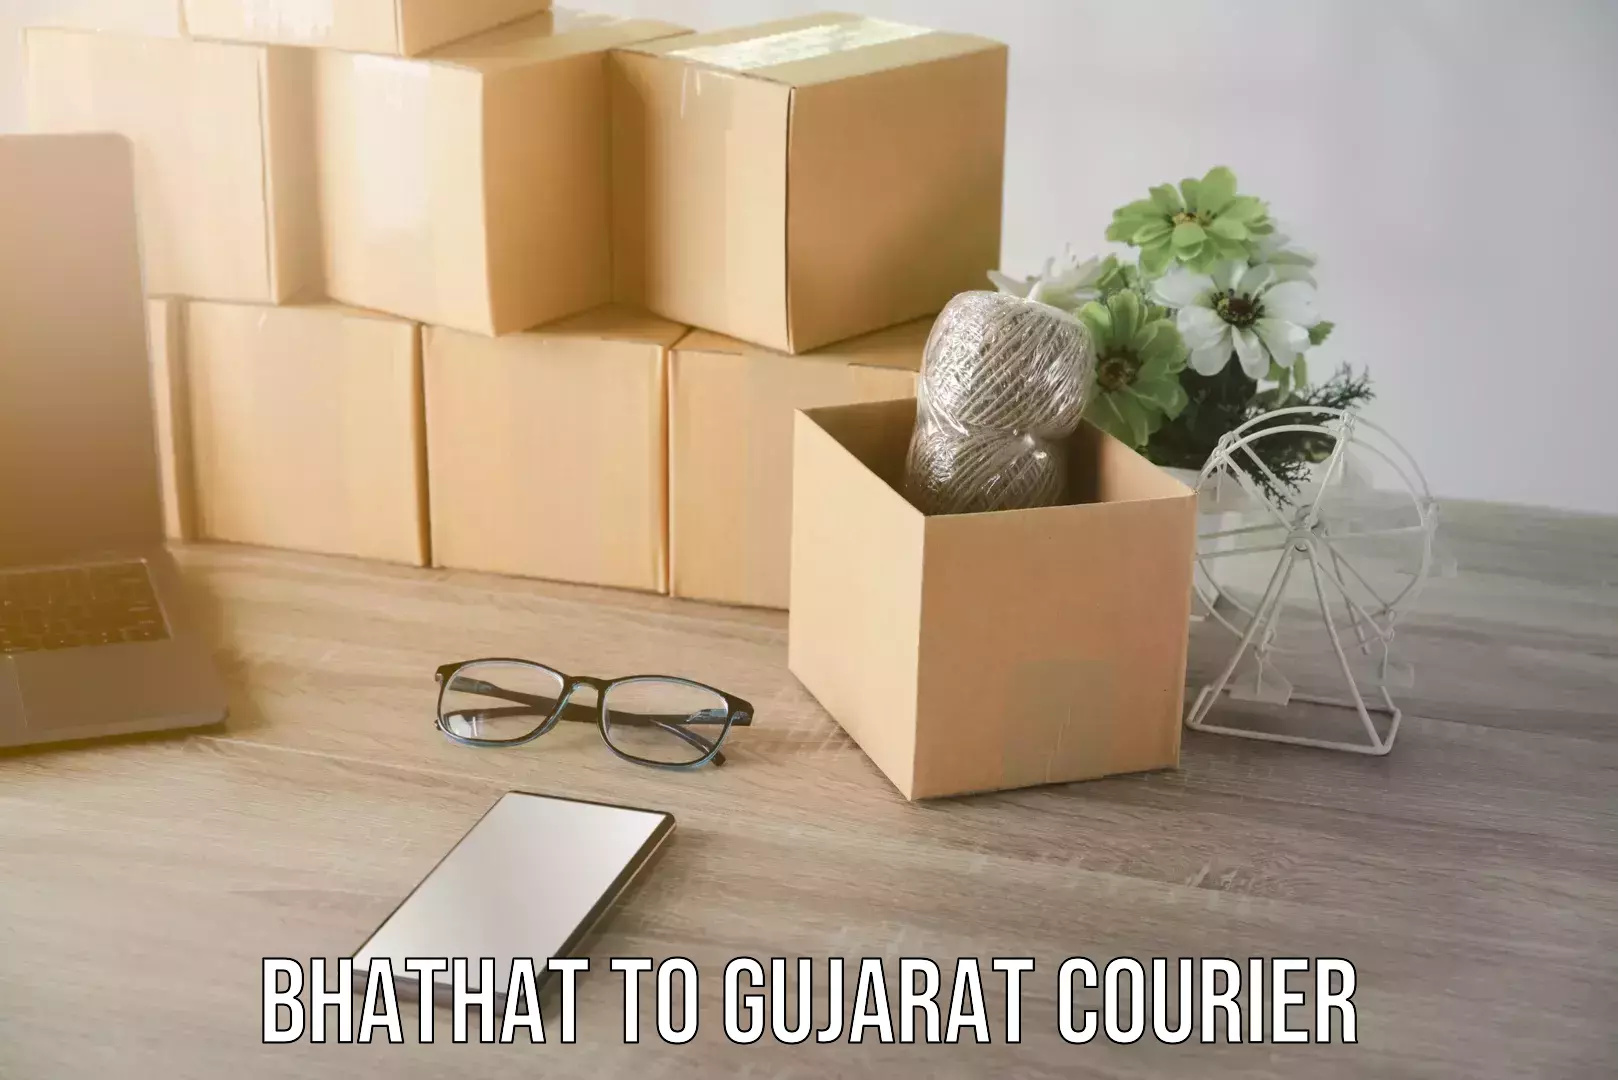 Supply chain delivery Bhathat to Gujarat